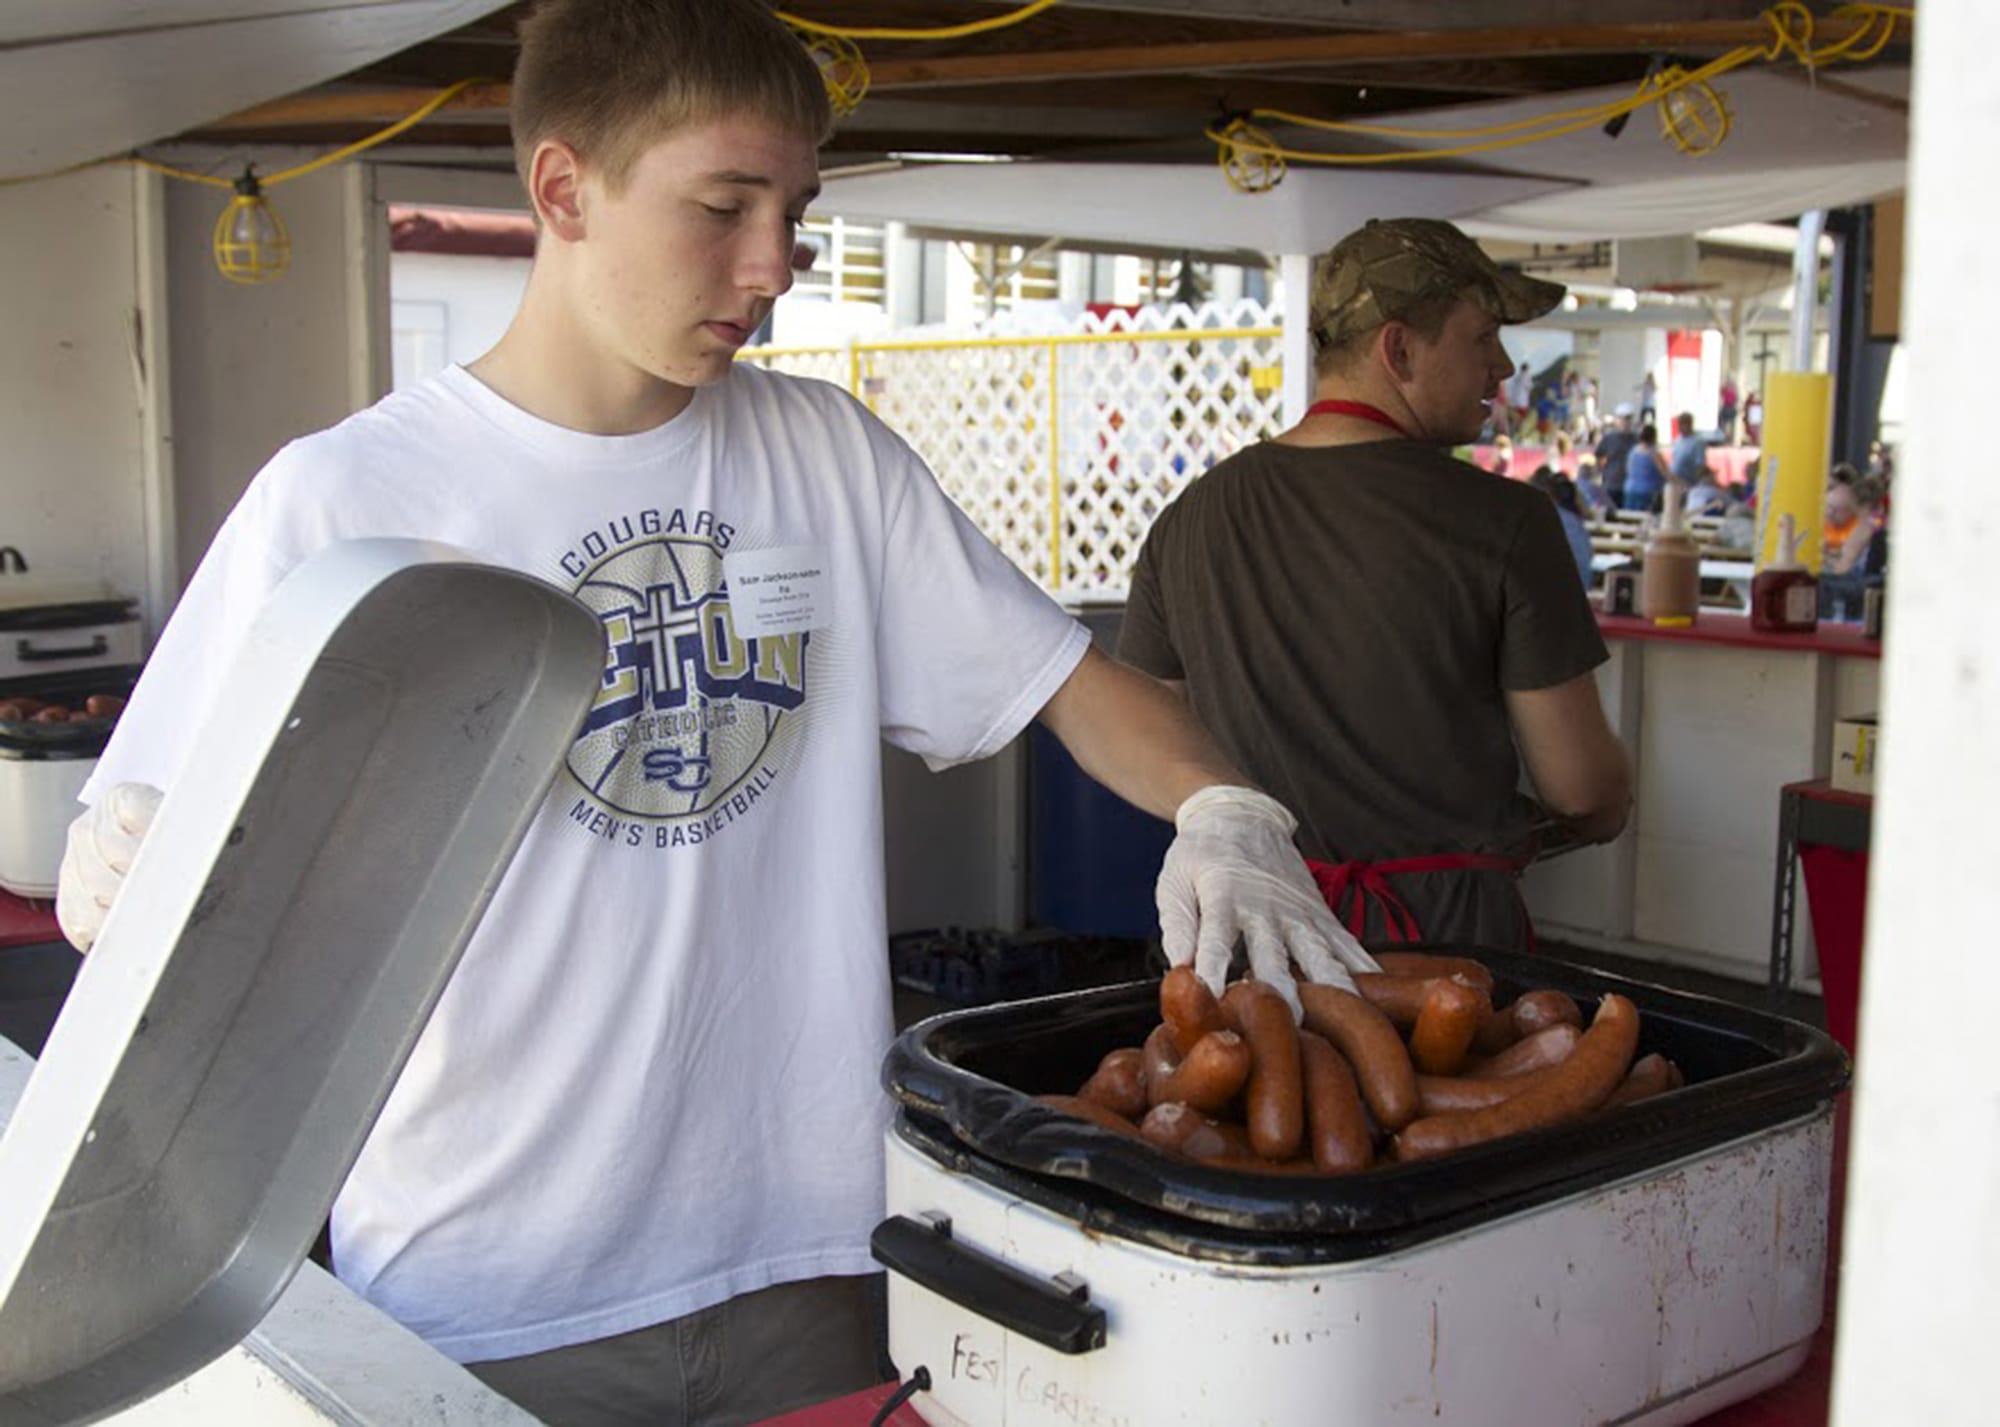 Garrett Wellman, 15, of Battle Ground works inside the sausage booth at the Vancouver Sausage Fest on Sunday, Sept. 7, 2014. The group had nearly sold out of original sausages by 3 p.m.